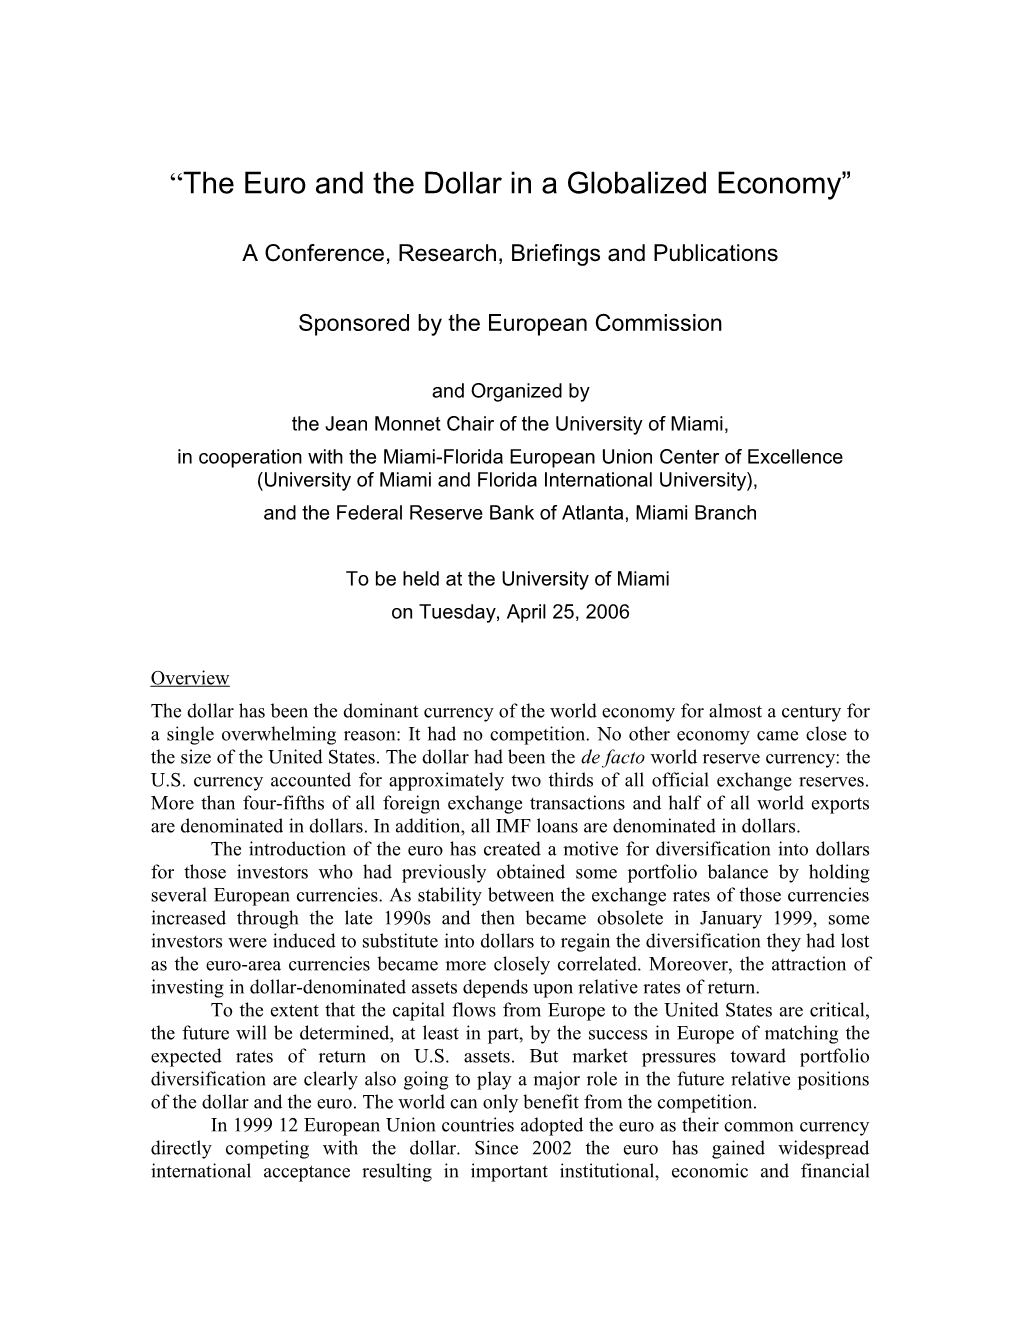 Conference Title: the Euro and the Dollar in a Globalized Economy